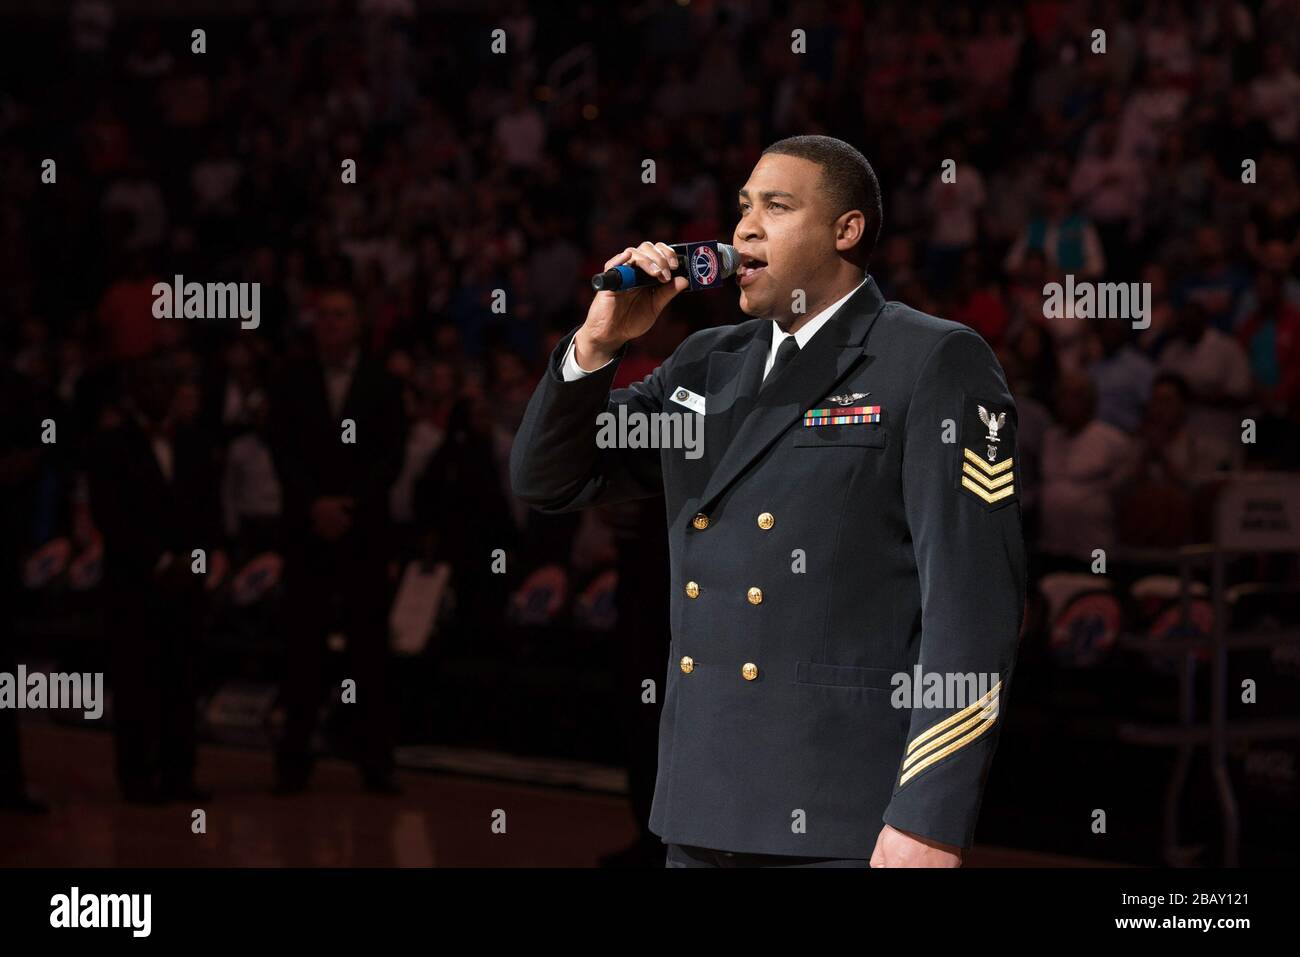 '170404-N-HG258-064 WASHINGTON, D.C. (April 4, 2017) Musician 1st Class Cory Parker, vocalist for the U.S. Navy Band, sings the National Anthem at a Washington Wizards NBA game held at the Verizon Center in Washington, D.C. (U.S. Navy photo by Senior Chief Musician Stephen Hassay/Released); 4 April 2017, 18:05; National Anthem at Wizards NBA Game; United States Navy Band from Washington, D.C., USA; ' Stock Photo